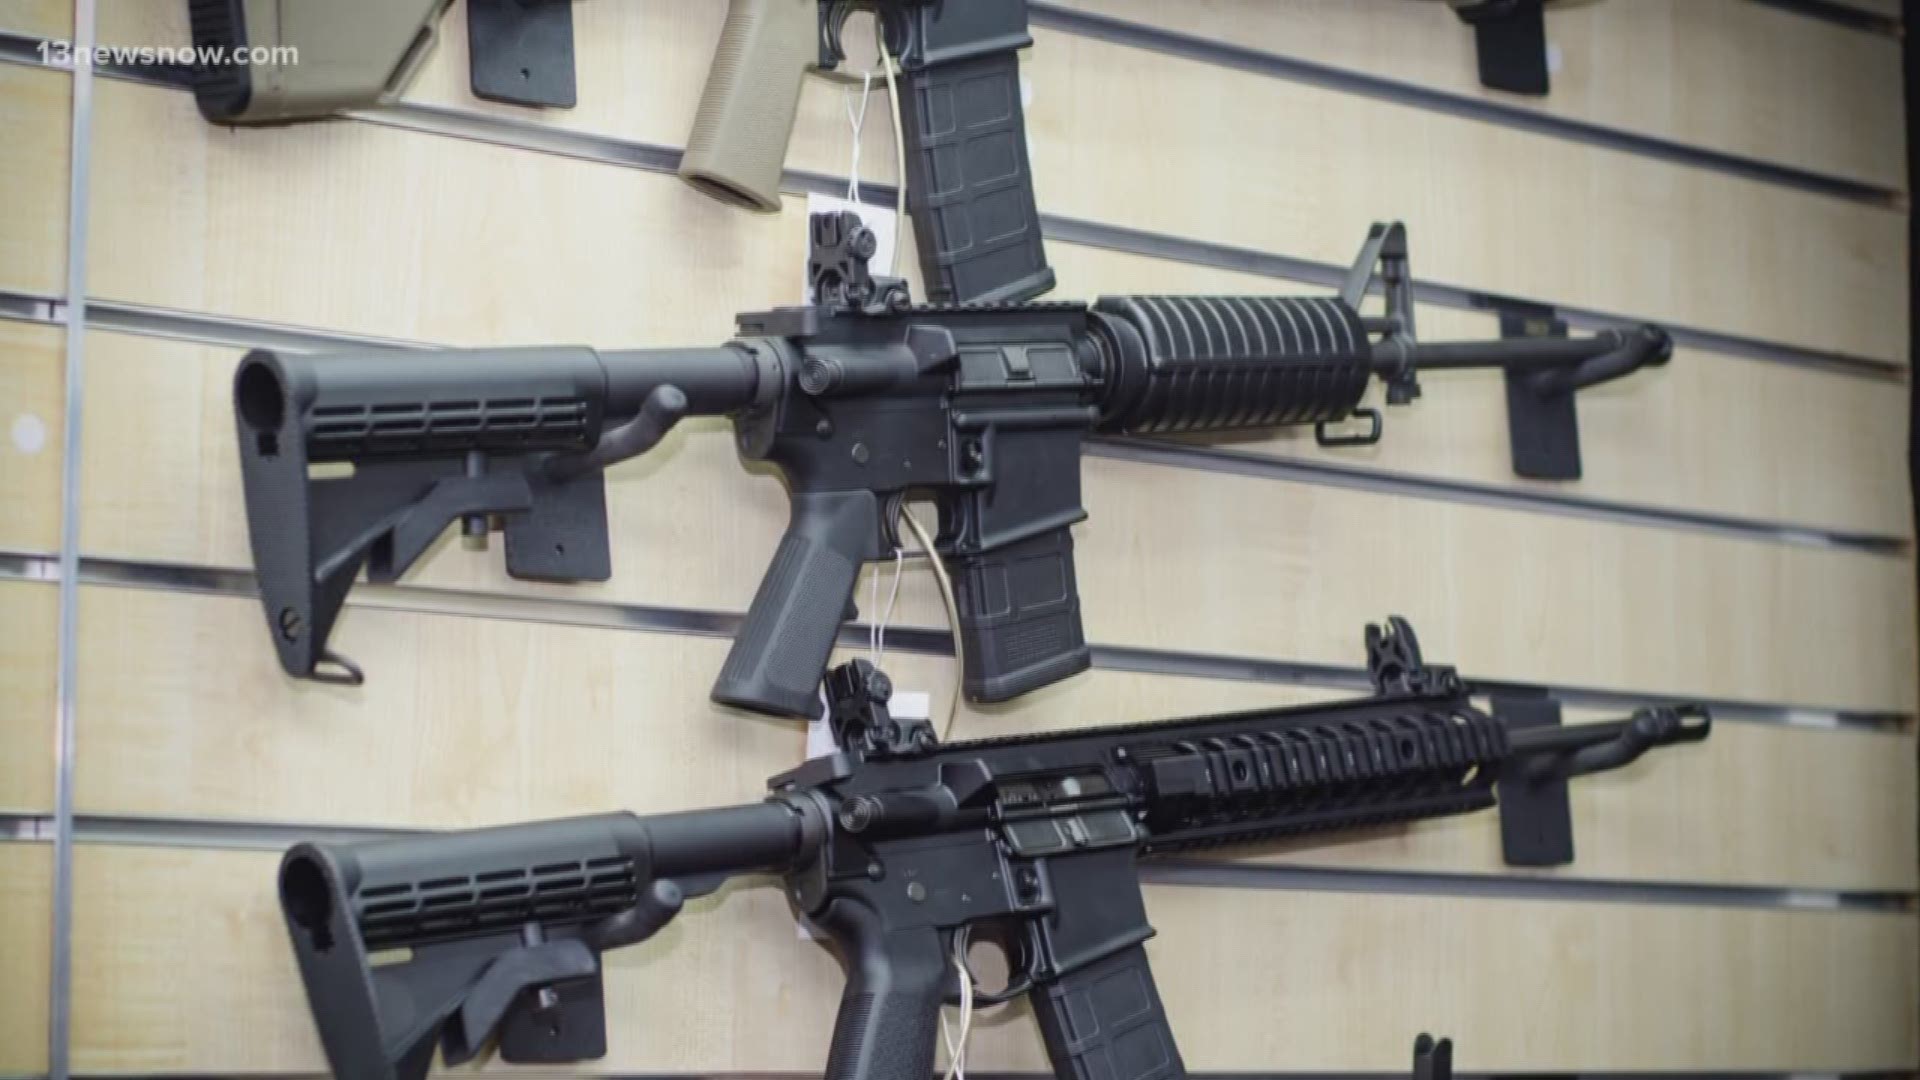 A Virginia House committee pushed a bill ahead that would ban different assault weapons in the Commonwealth.